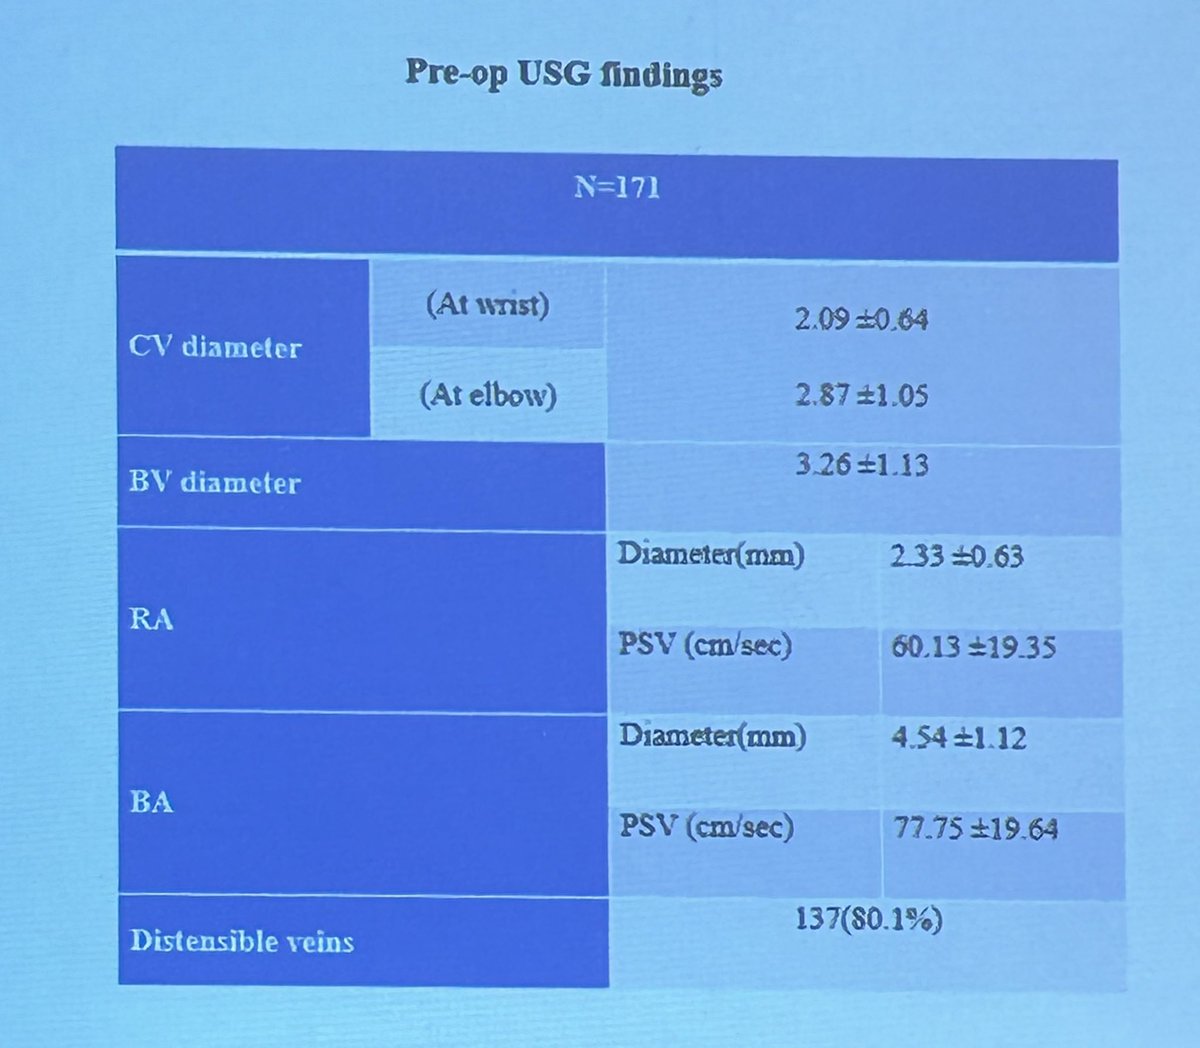 At the @NephAssocKA, from @MKmcmanipal, @RamachandraIndu presented an observational study on the use of doppler US, call it POCUS, on screening of pts before AVF Creation. More brachio-cephalic AVFs. Watch out for vessels < 2mm Diameter. #vascularaccess